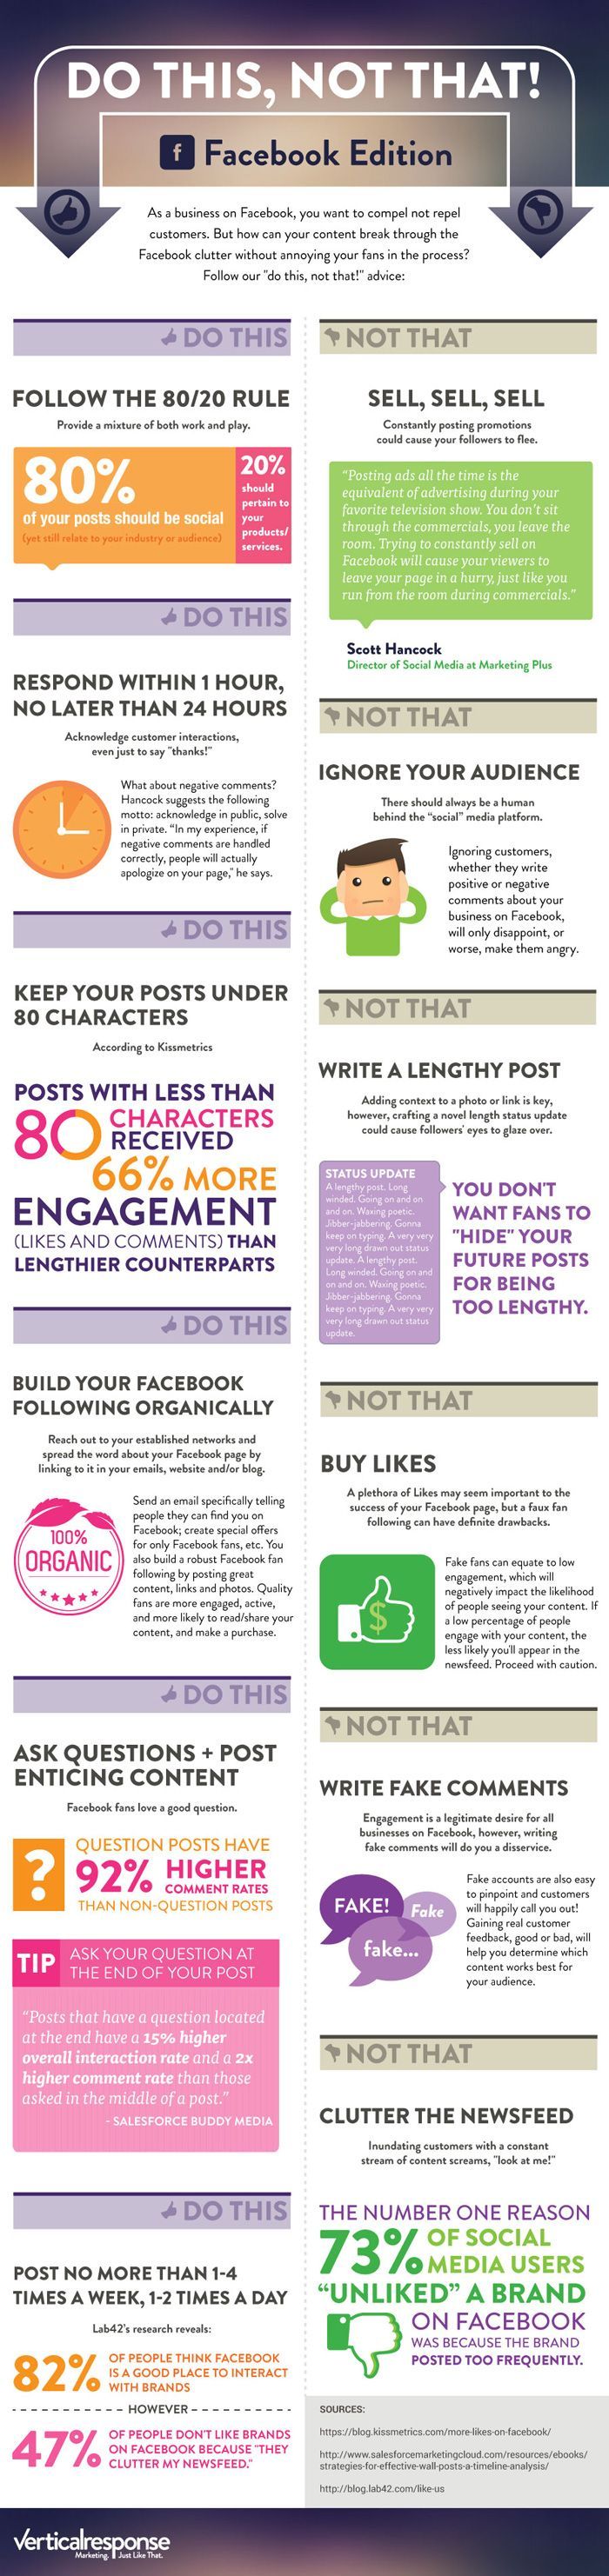 1532198054_957_Marketing-Infographic-Handy-infographic-of-the-top-Facebook-Page-tips-Pin-this-to-remind-you-how-to-c Marketing Infographic : Handy infographic of the top Facebook Page tips! Pin this to remind you how to c...